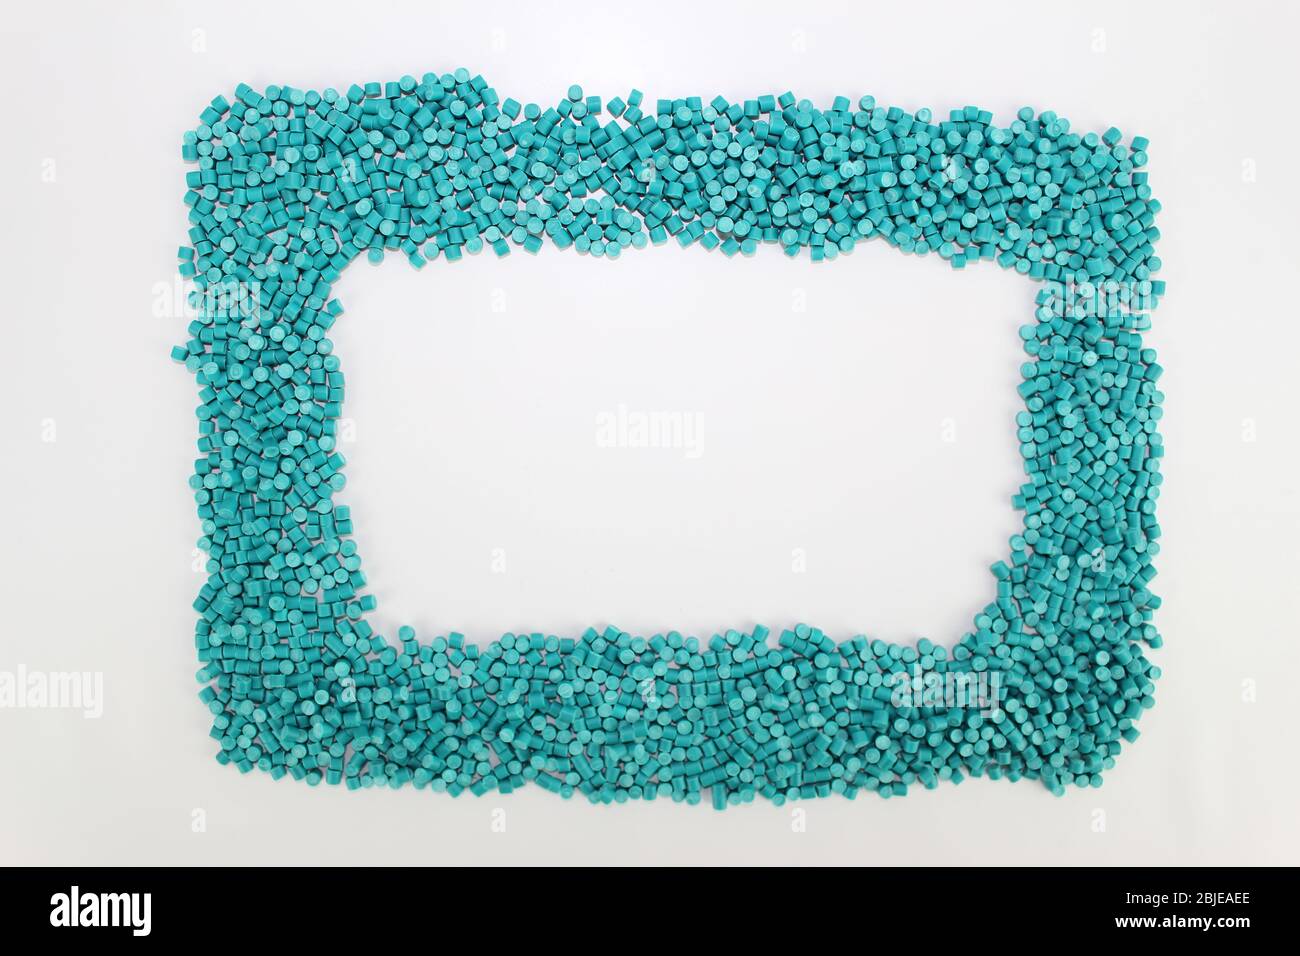 The geometric figure formed by polymers, plastic, which represents a frame with a white background inside. Stock Photo